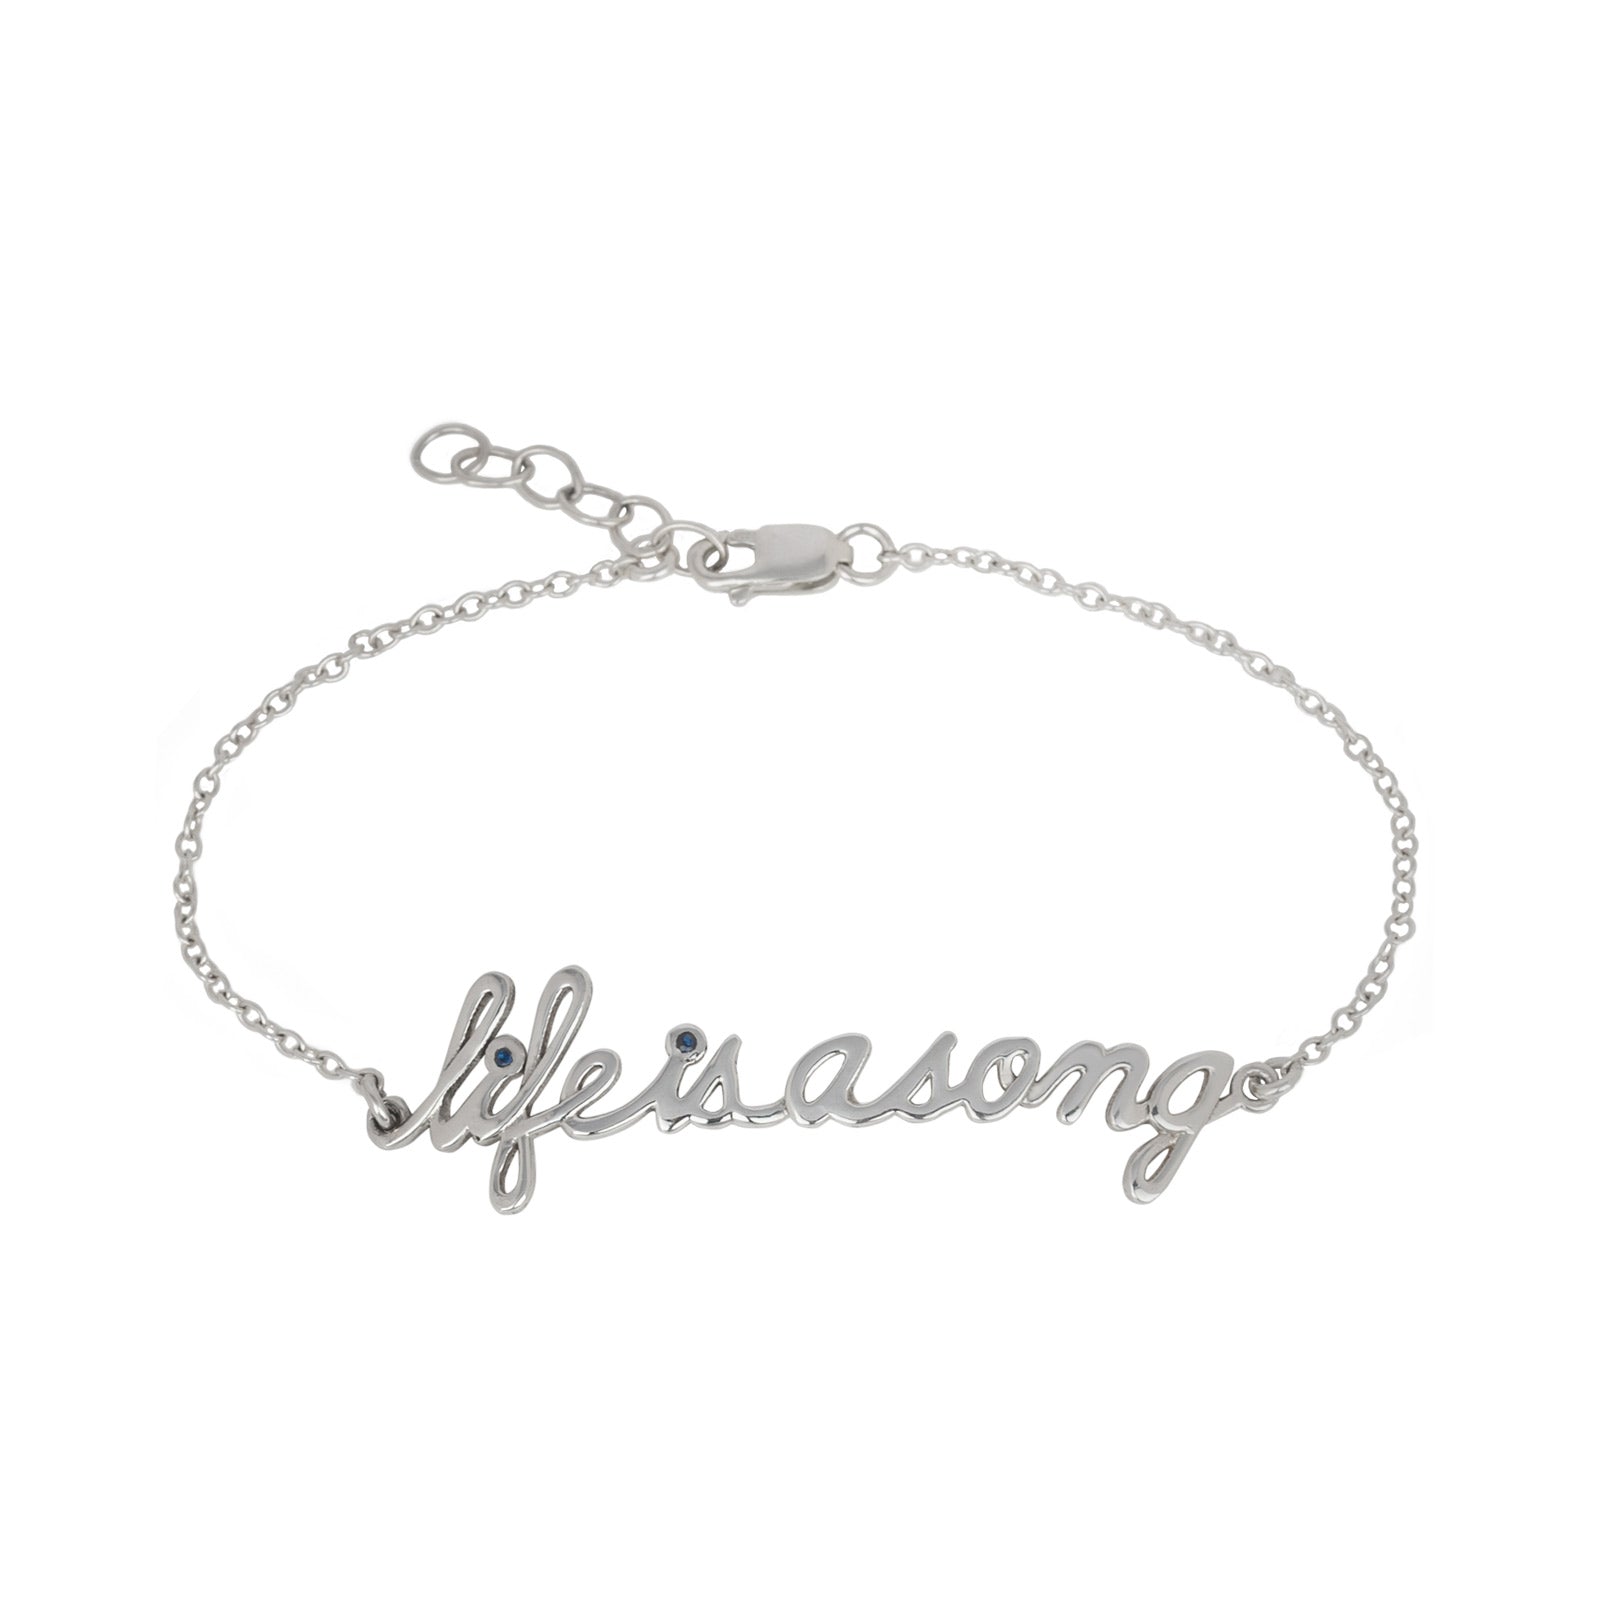 Sterling silver bracelet with handwritten life is a song lettering